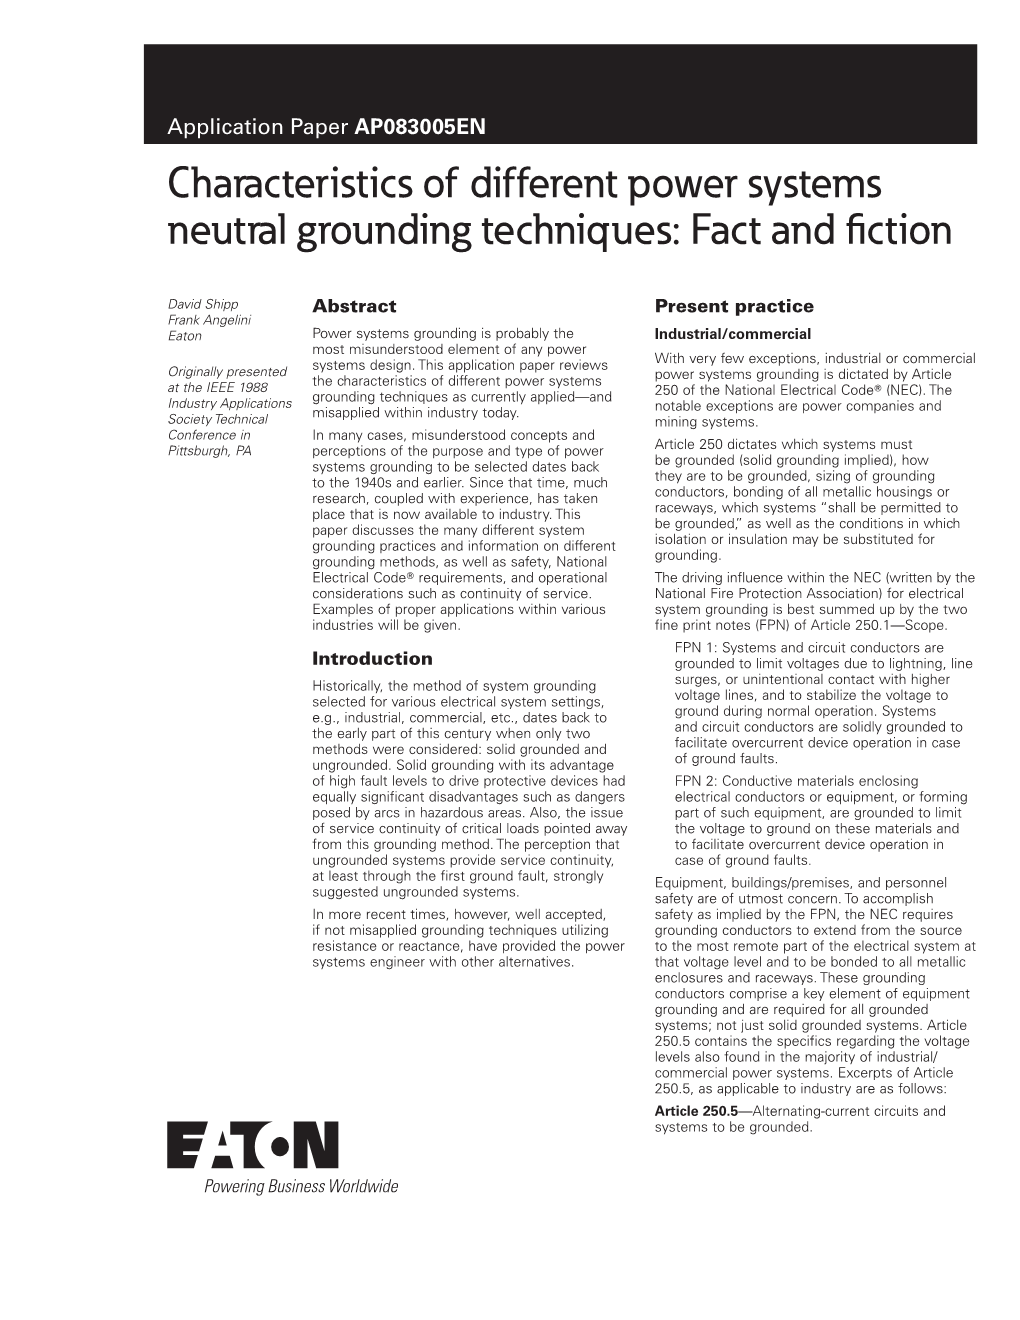 Characteristics of Different Power Systems Neutral Grounding Techniques: Fact and Fiction